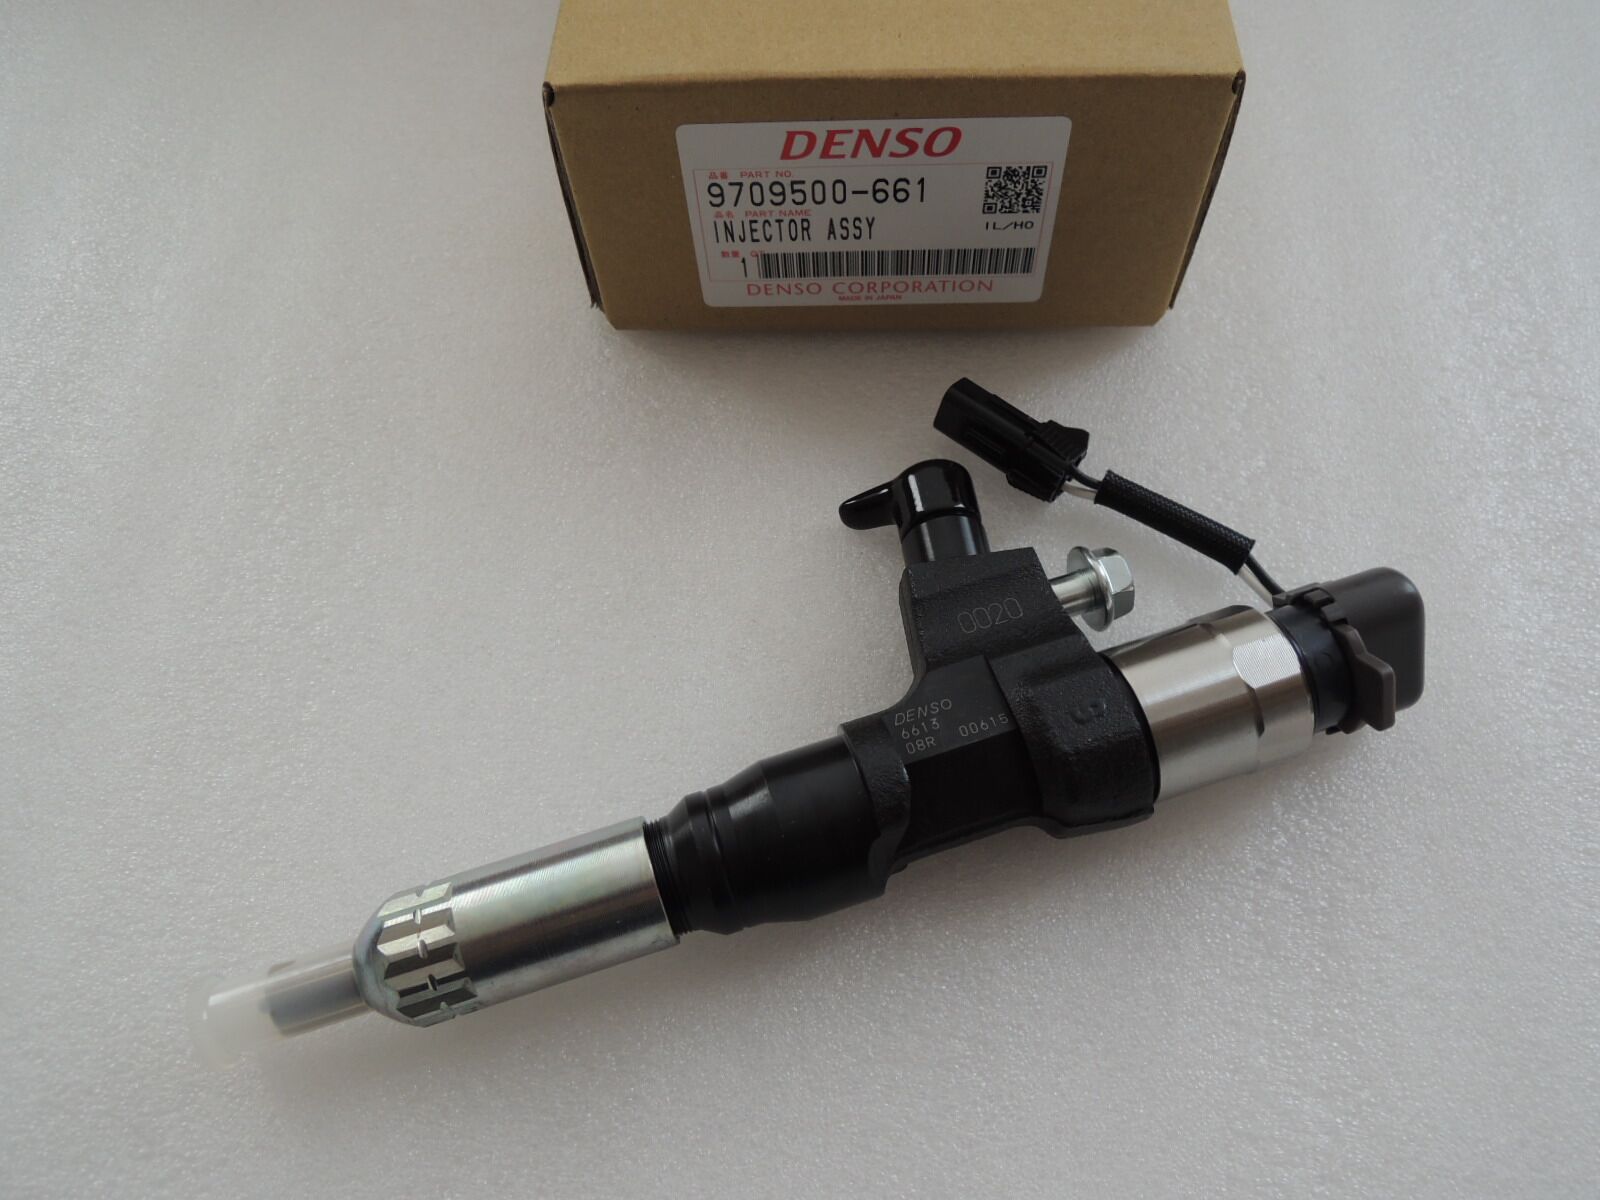 Special Design for Denso Valve Rod - DENSO Common Rail Diesel Fuel Injector  095000-6613 23670-E0020  for Hino J08E  – Dongtai